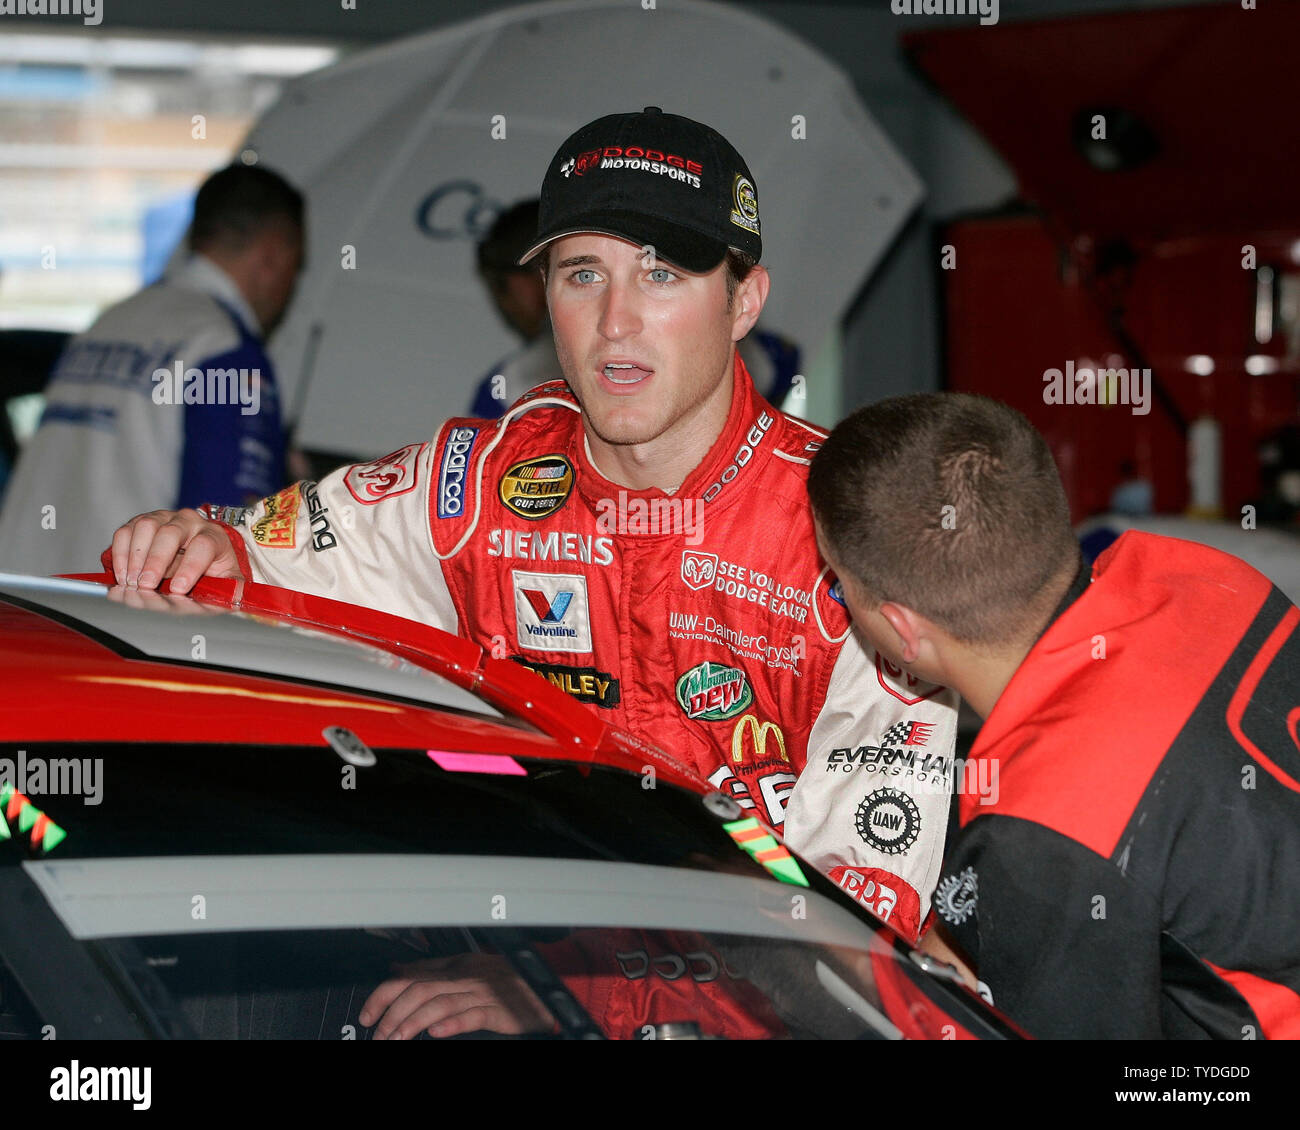 NASCAR Nextel Cup driver Kasey Kahne climbs into his car for the beginning of practice, in the garage area at the Homestead-Miami Speedway, in Homestead,  Florida on November 18, 2005.  (UPI Photo/Michael Bush) Stock Photo